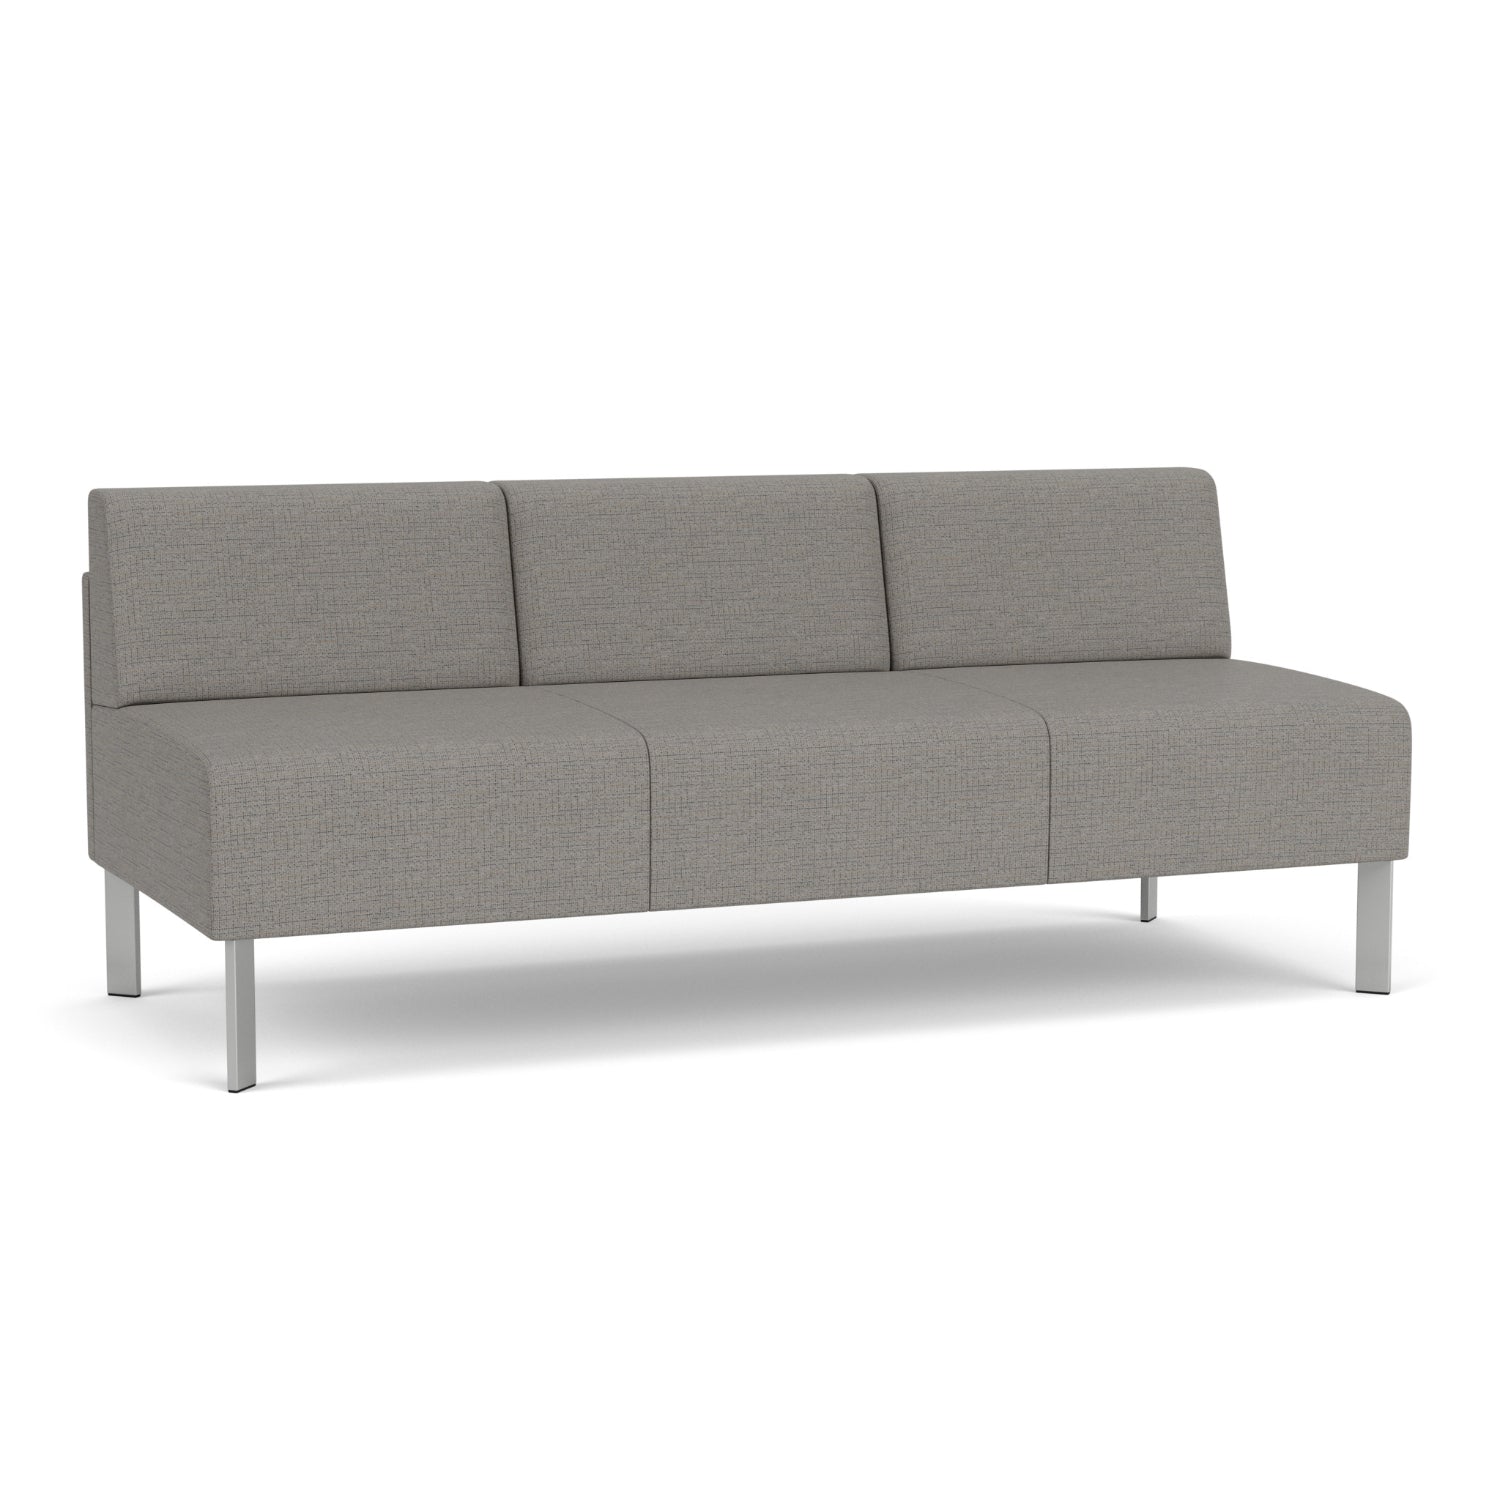 Luxe Collection Reception Seating, Armless Sofa, Designer Fabric Upholstery, FREE SHIPPING